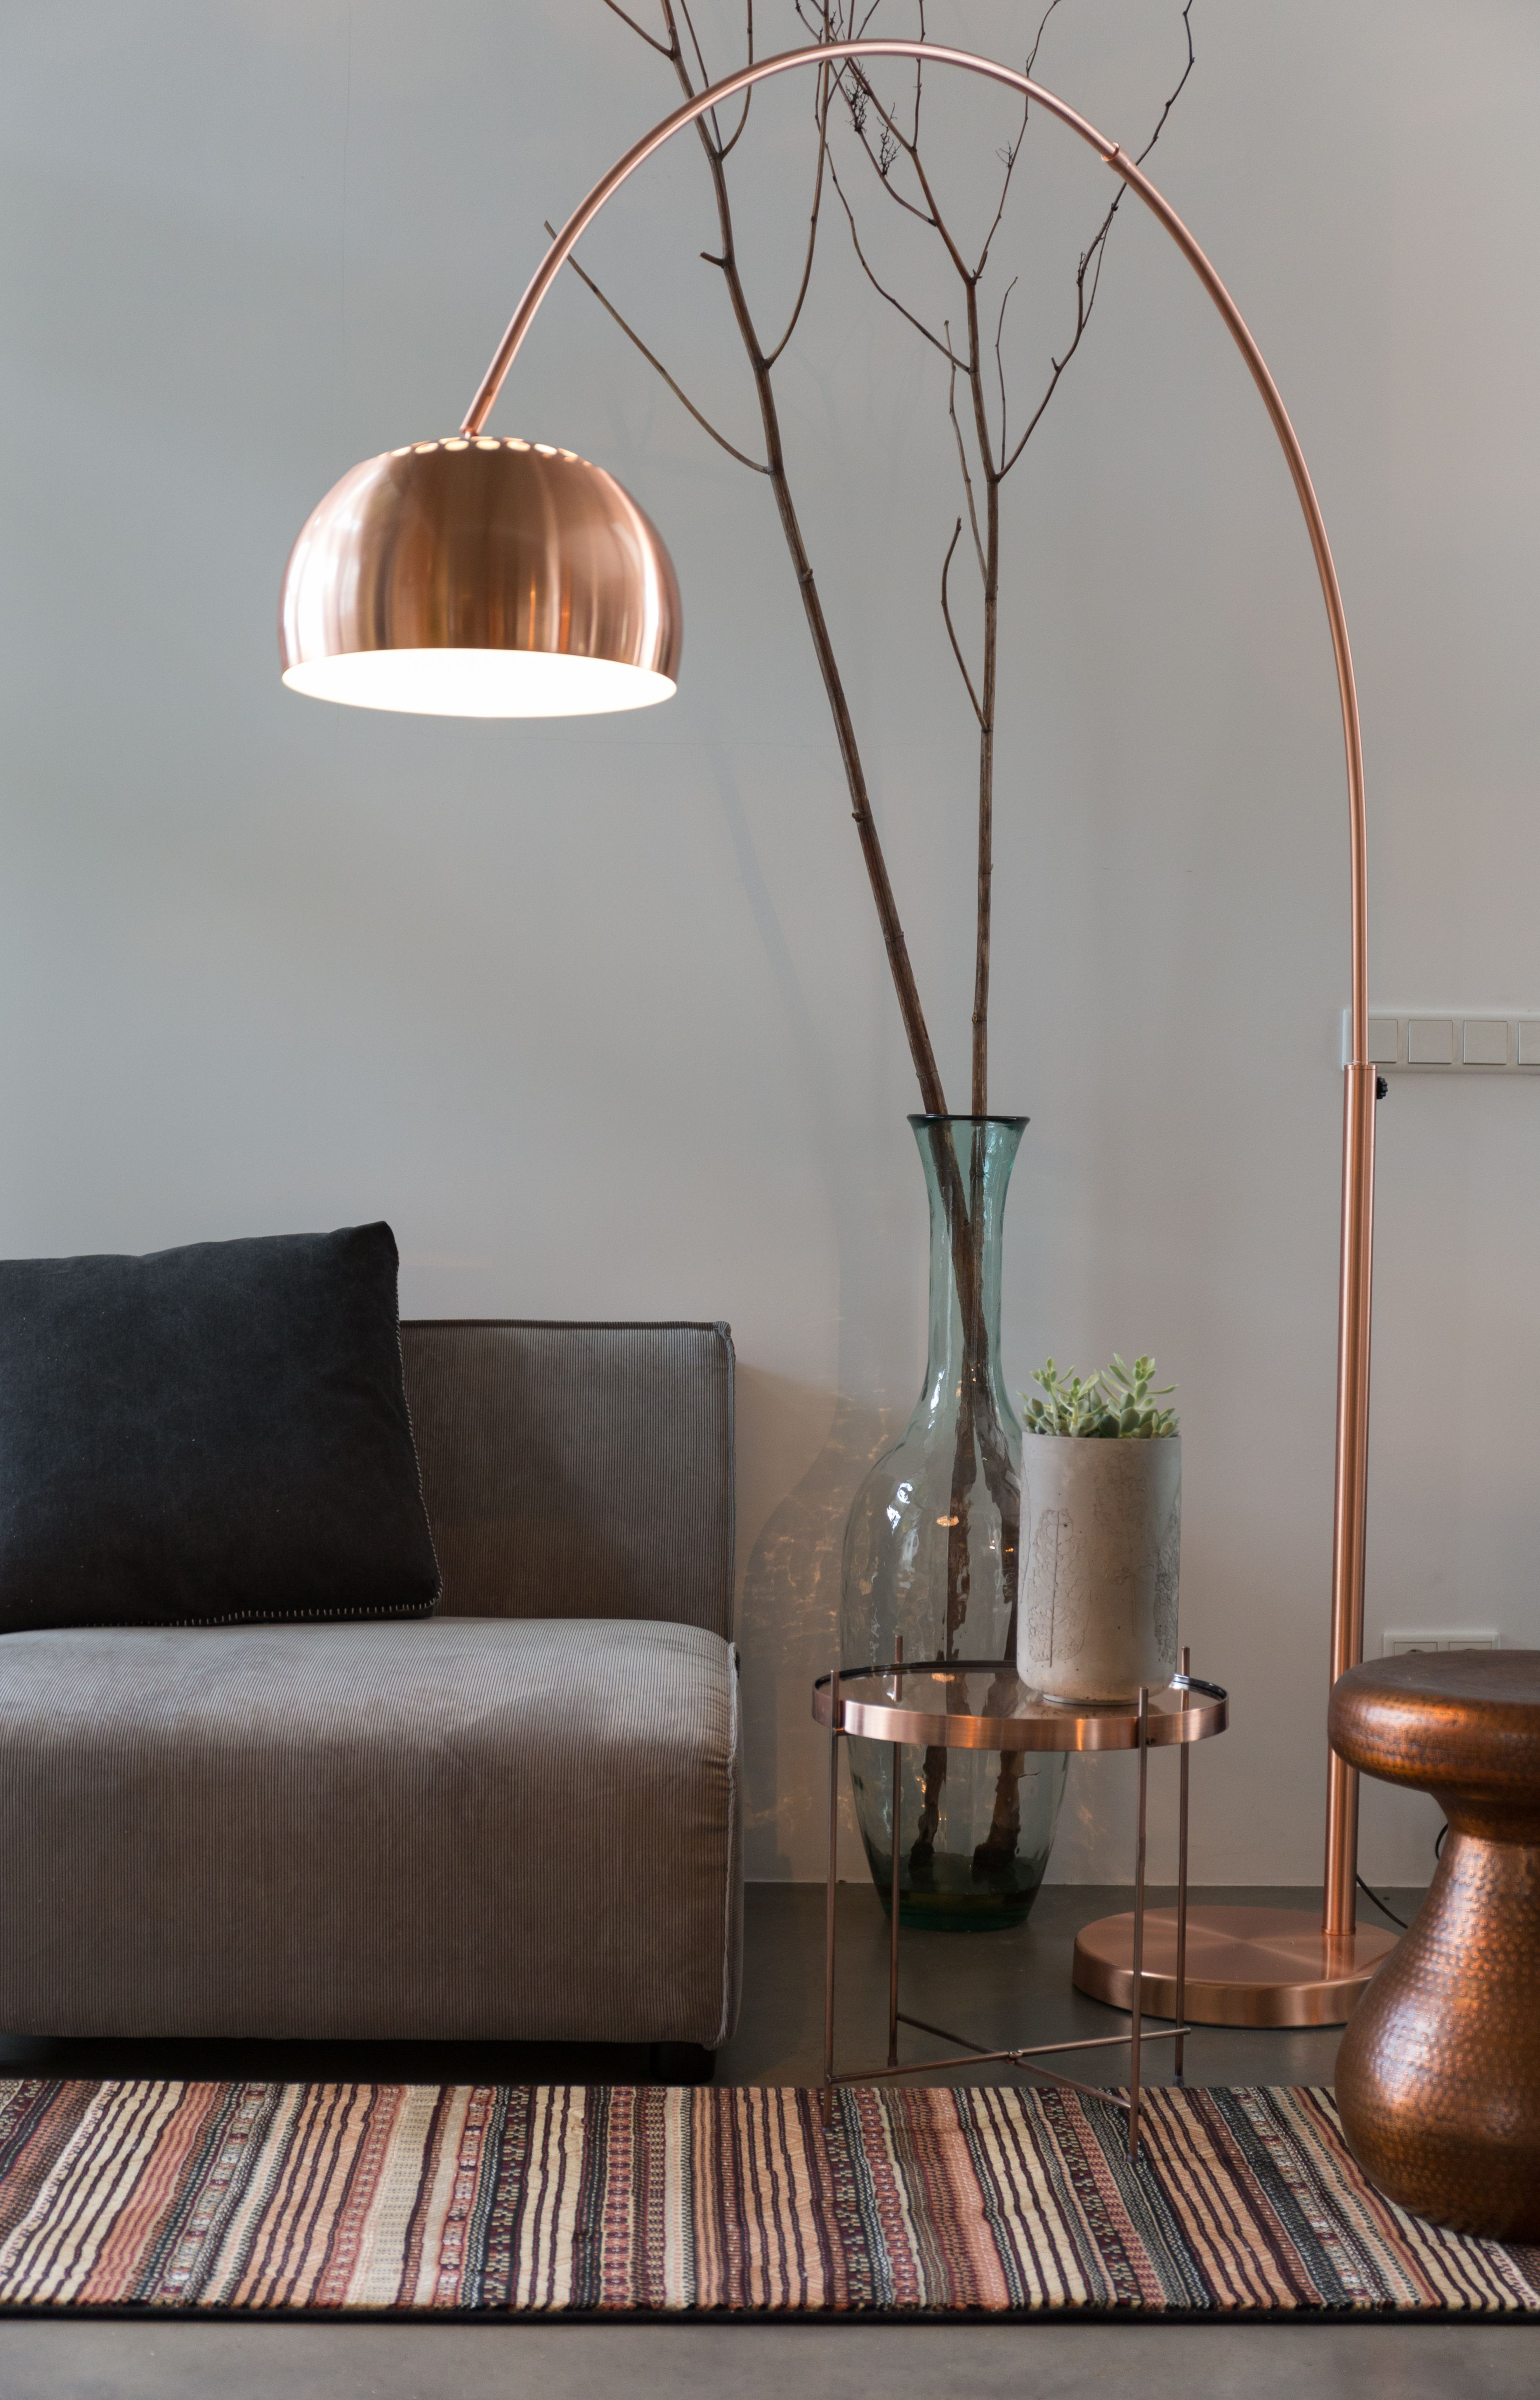 23 Ways To Decorate With Copper Modern Floor Lamps Arc intended for sizing 3508 X 5466